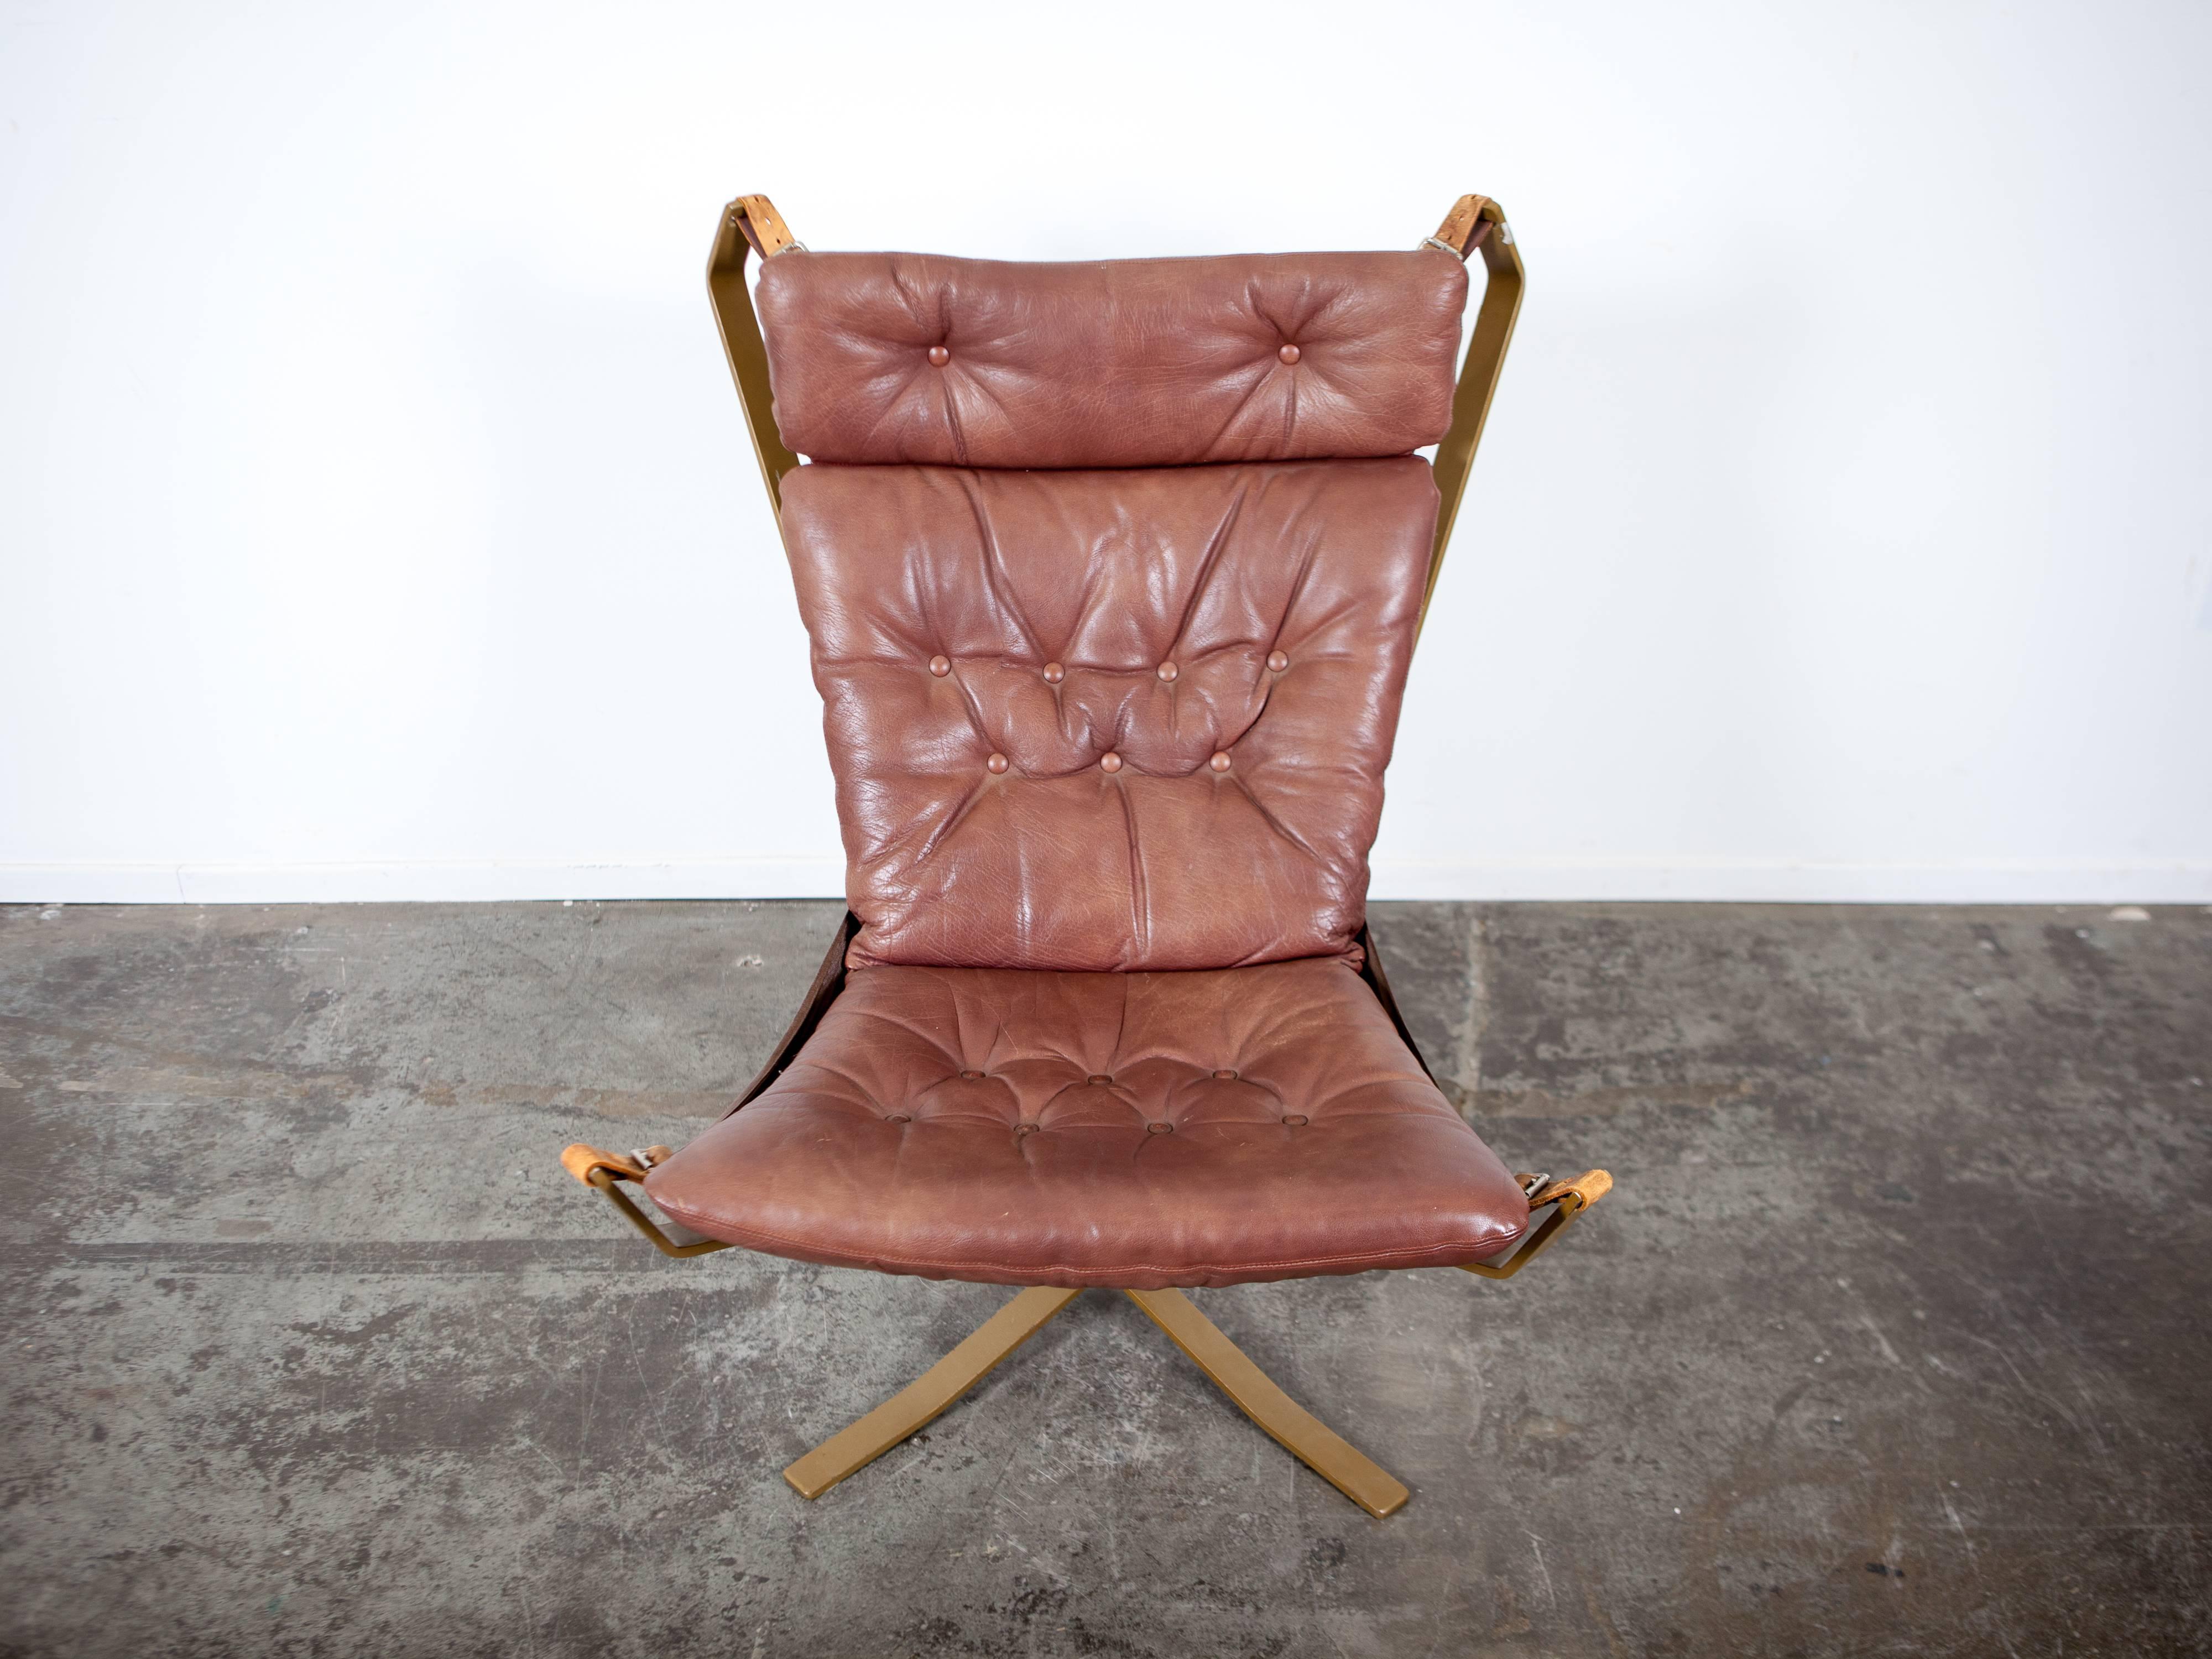 Danish furniture maker made 'Falcon' style tall back chair with metal frame and original leather cushion.  The metal is bronzed and the original leather cushion straps are intact. It was Denmark's 'version' of the Sigurd Ressell Falcon chair. 